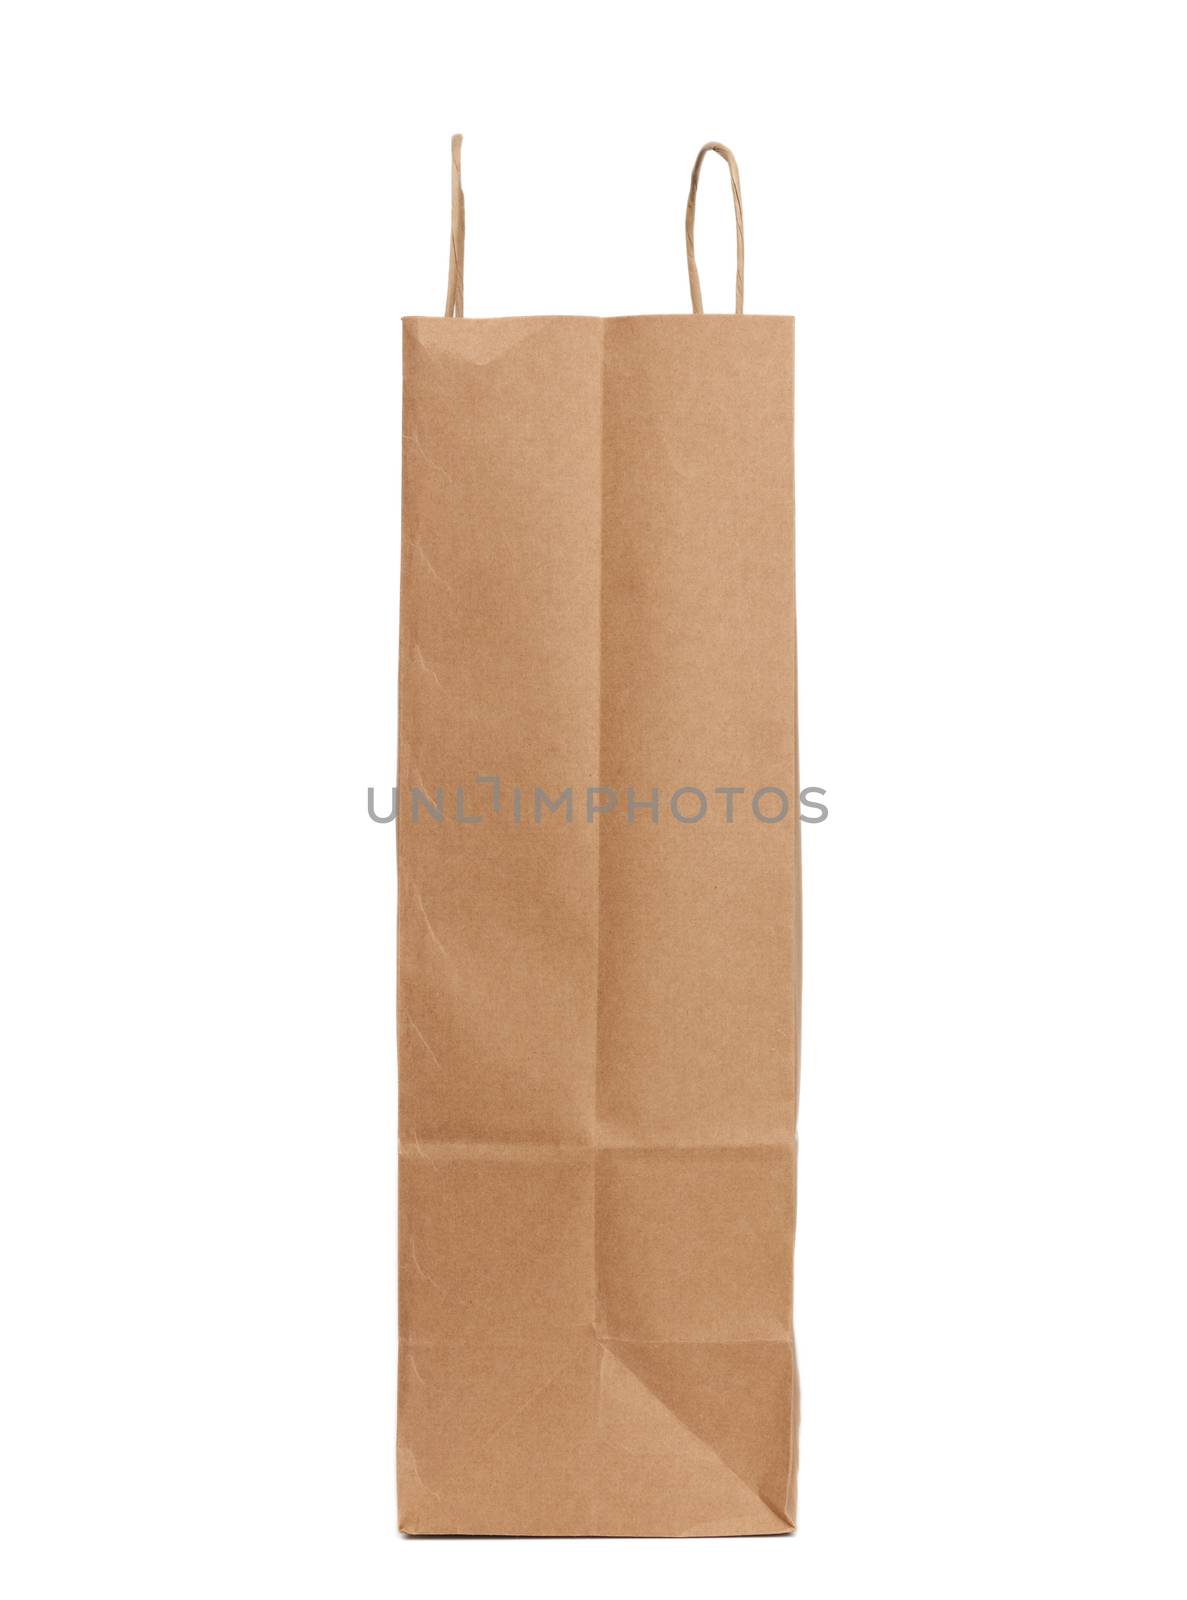 disposable brown craft paper bag with handles isolated on a white background